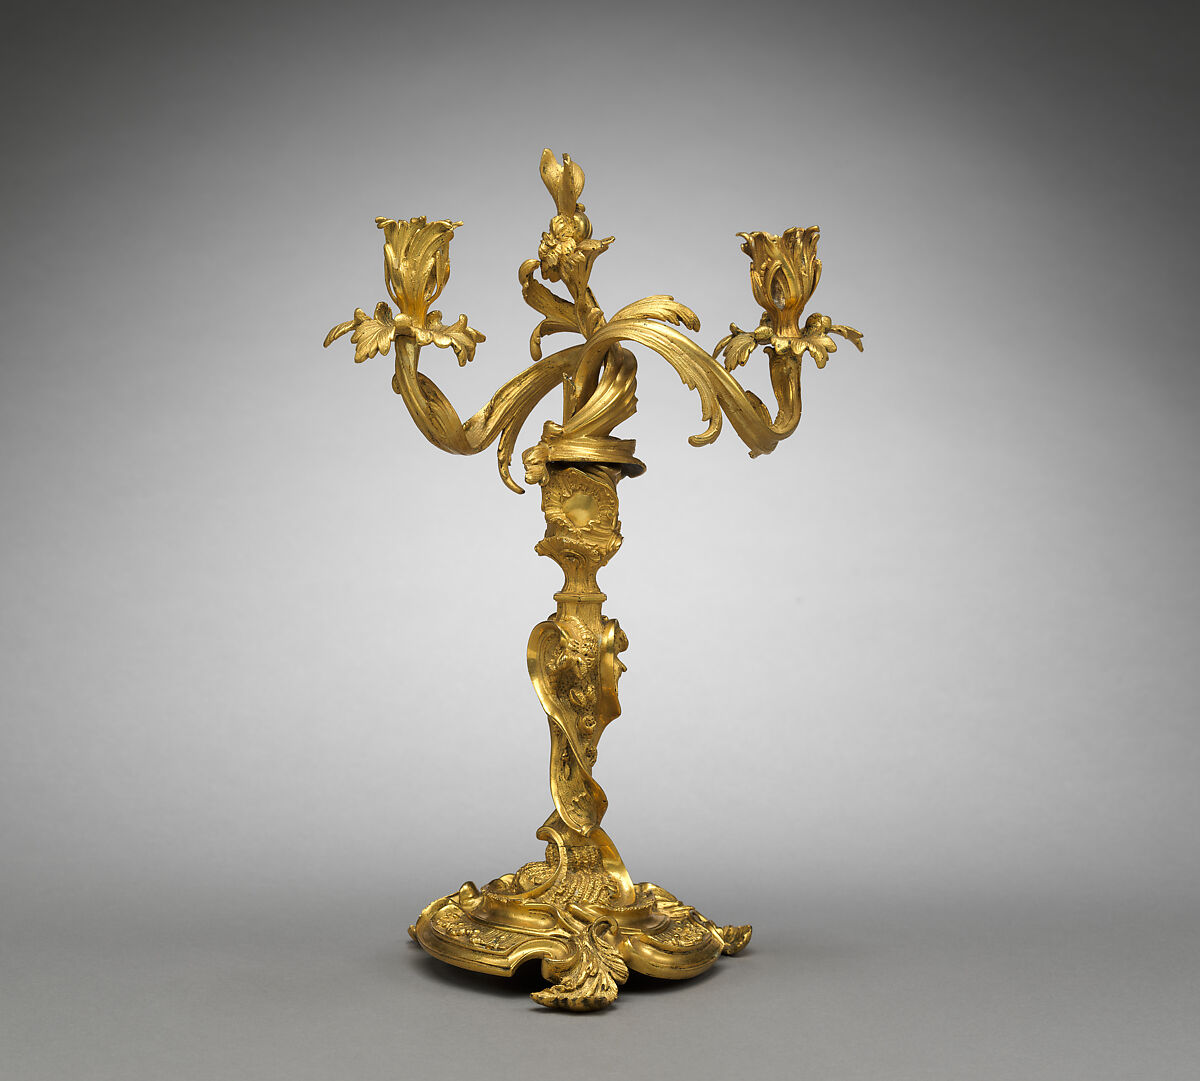 Candlestick with Two Branches, Gilt bronze., French, Paris 